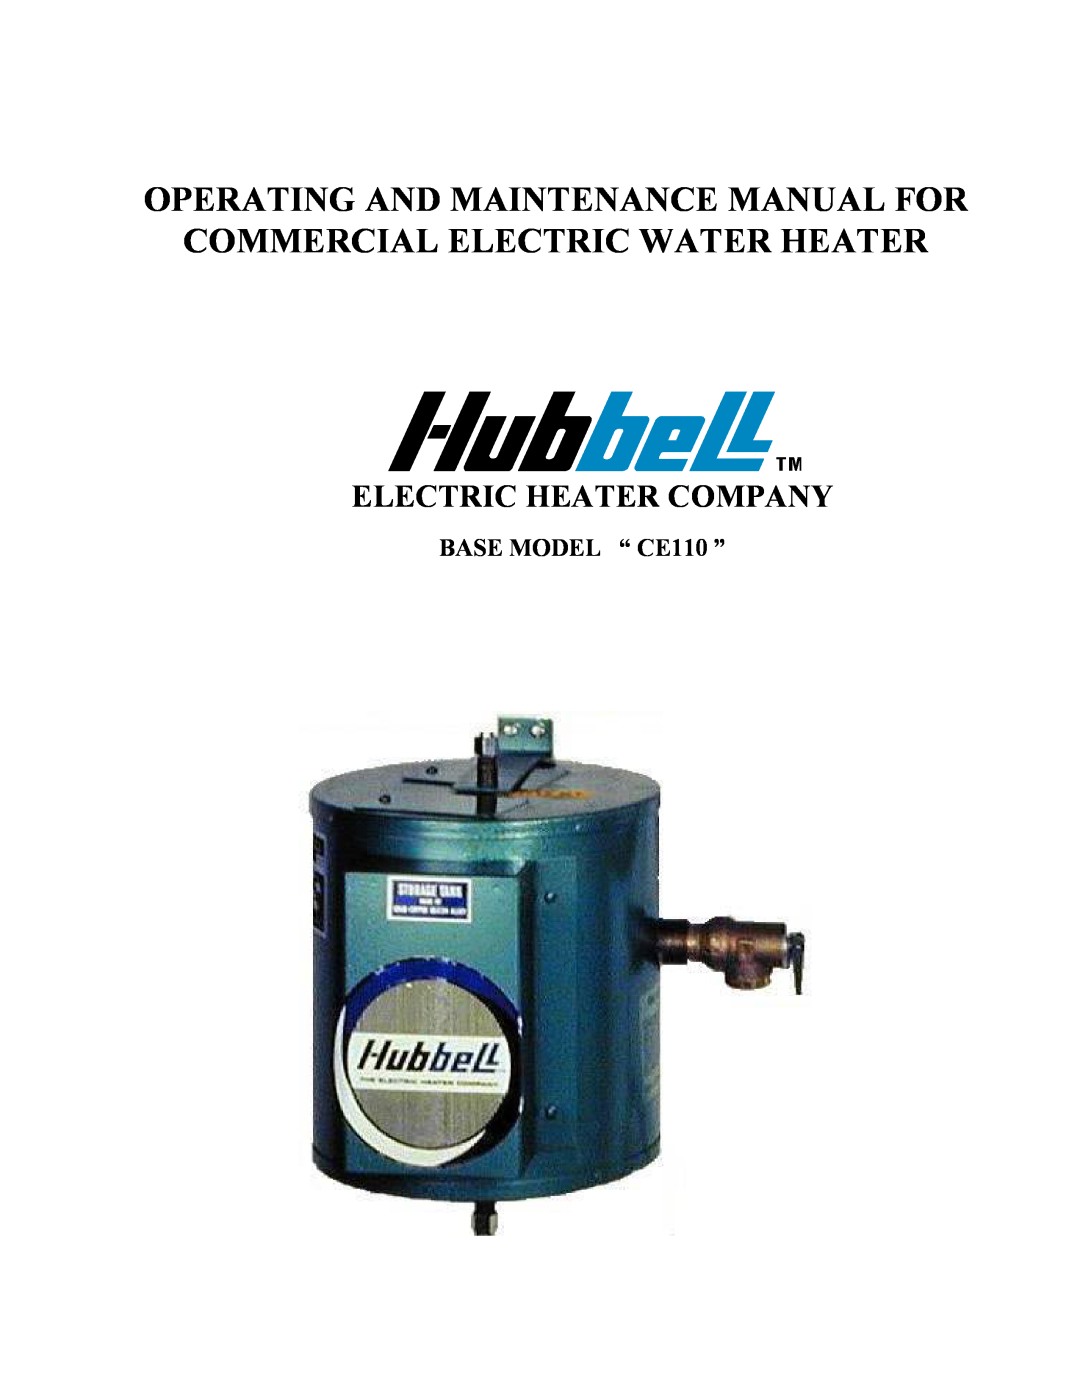 Hubbell Electric Heater Company manual BASE MODEL “ CE110 ”, Operating And Maintenance Manual For 